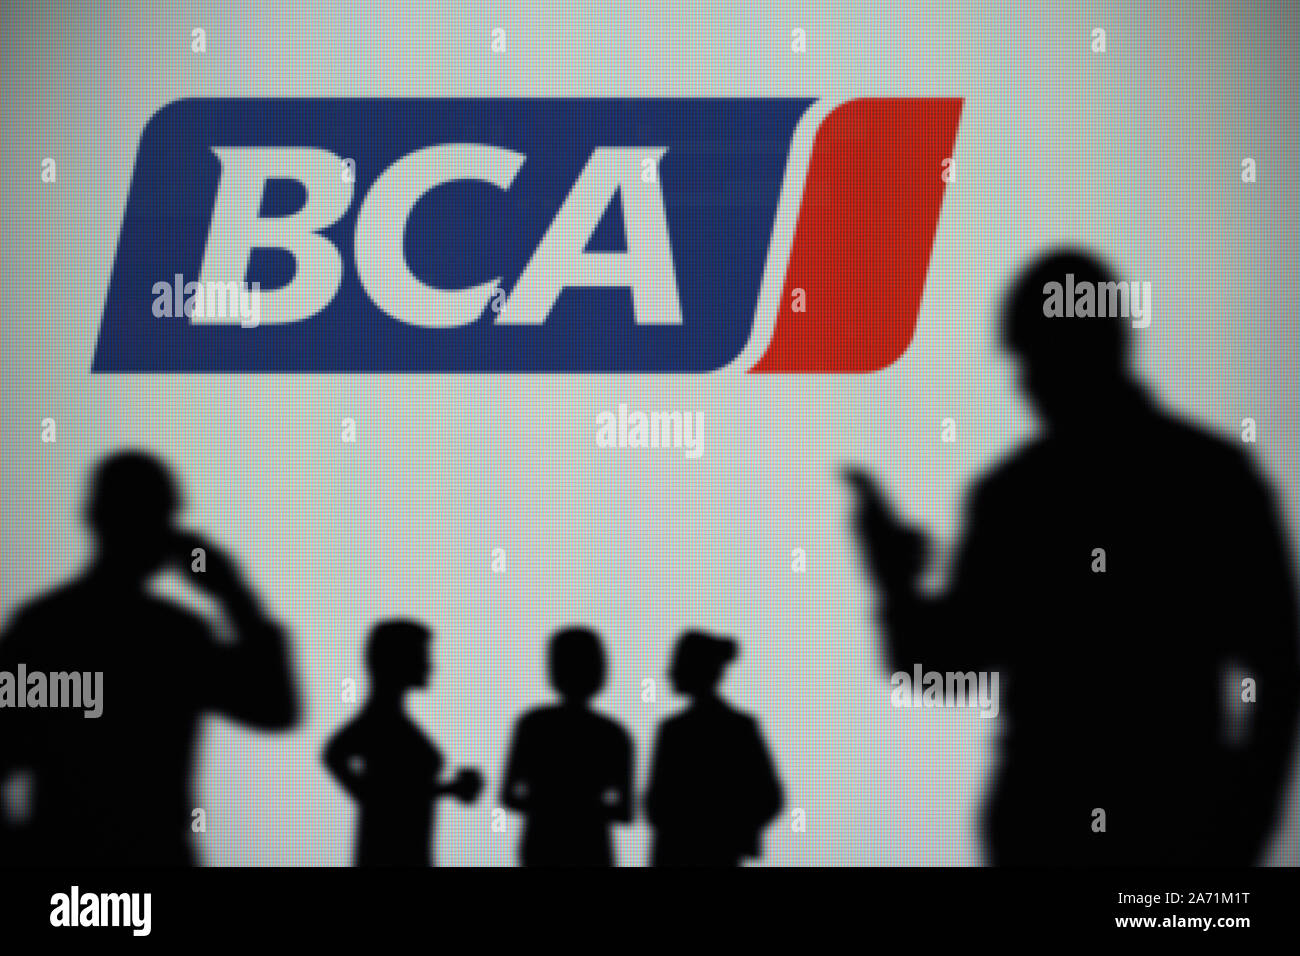 The BCA (British Car Auctions) logo is seen on an LED screen in the background while a silhouetted person uses a smartphone (Editorial use only) Stock Photo